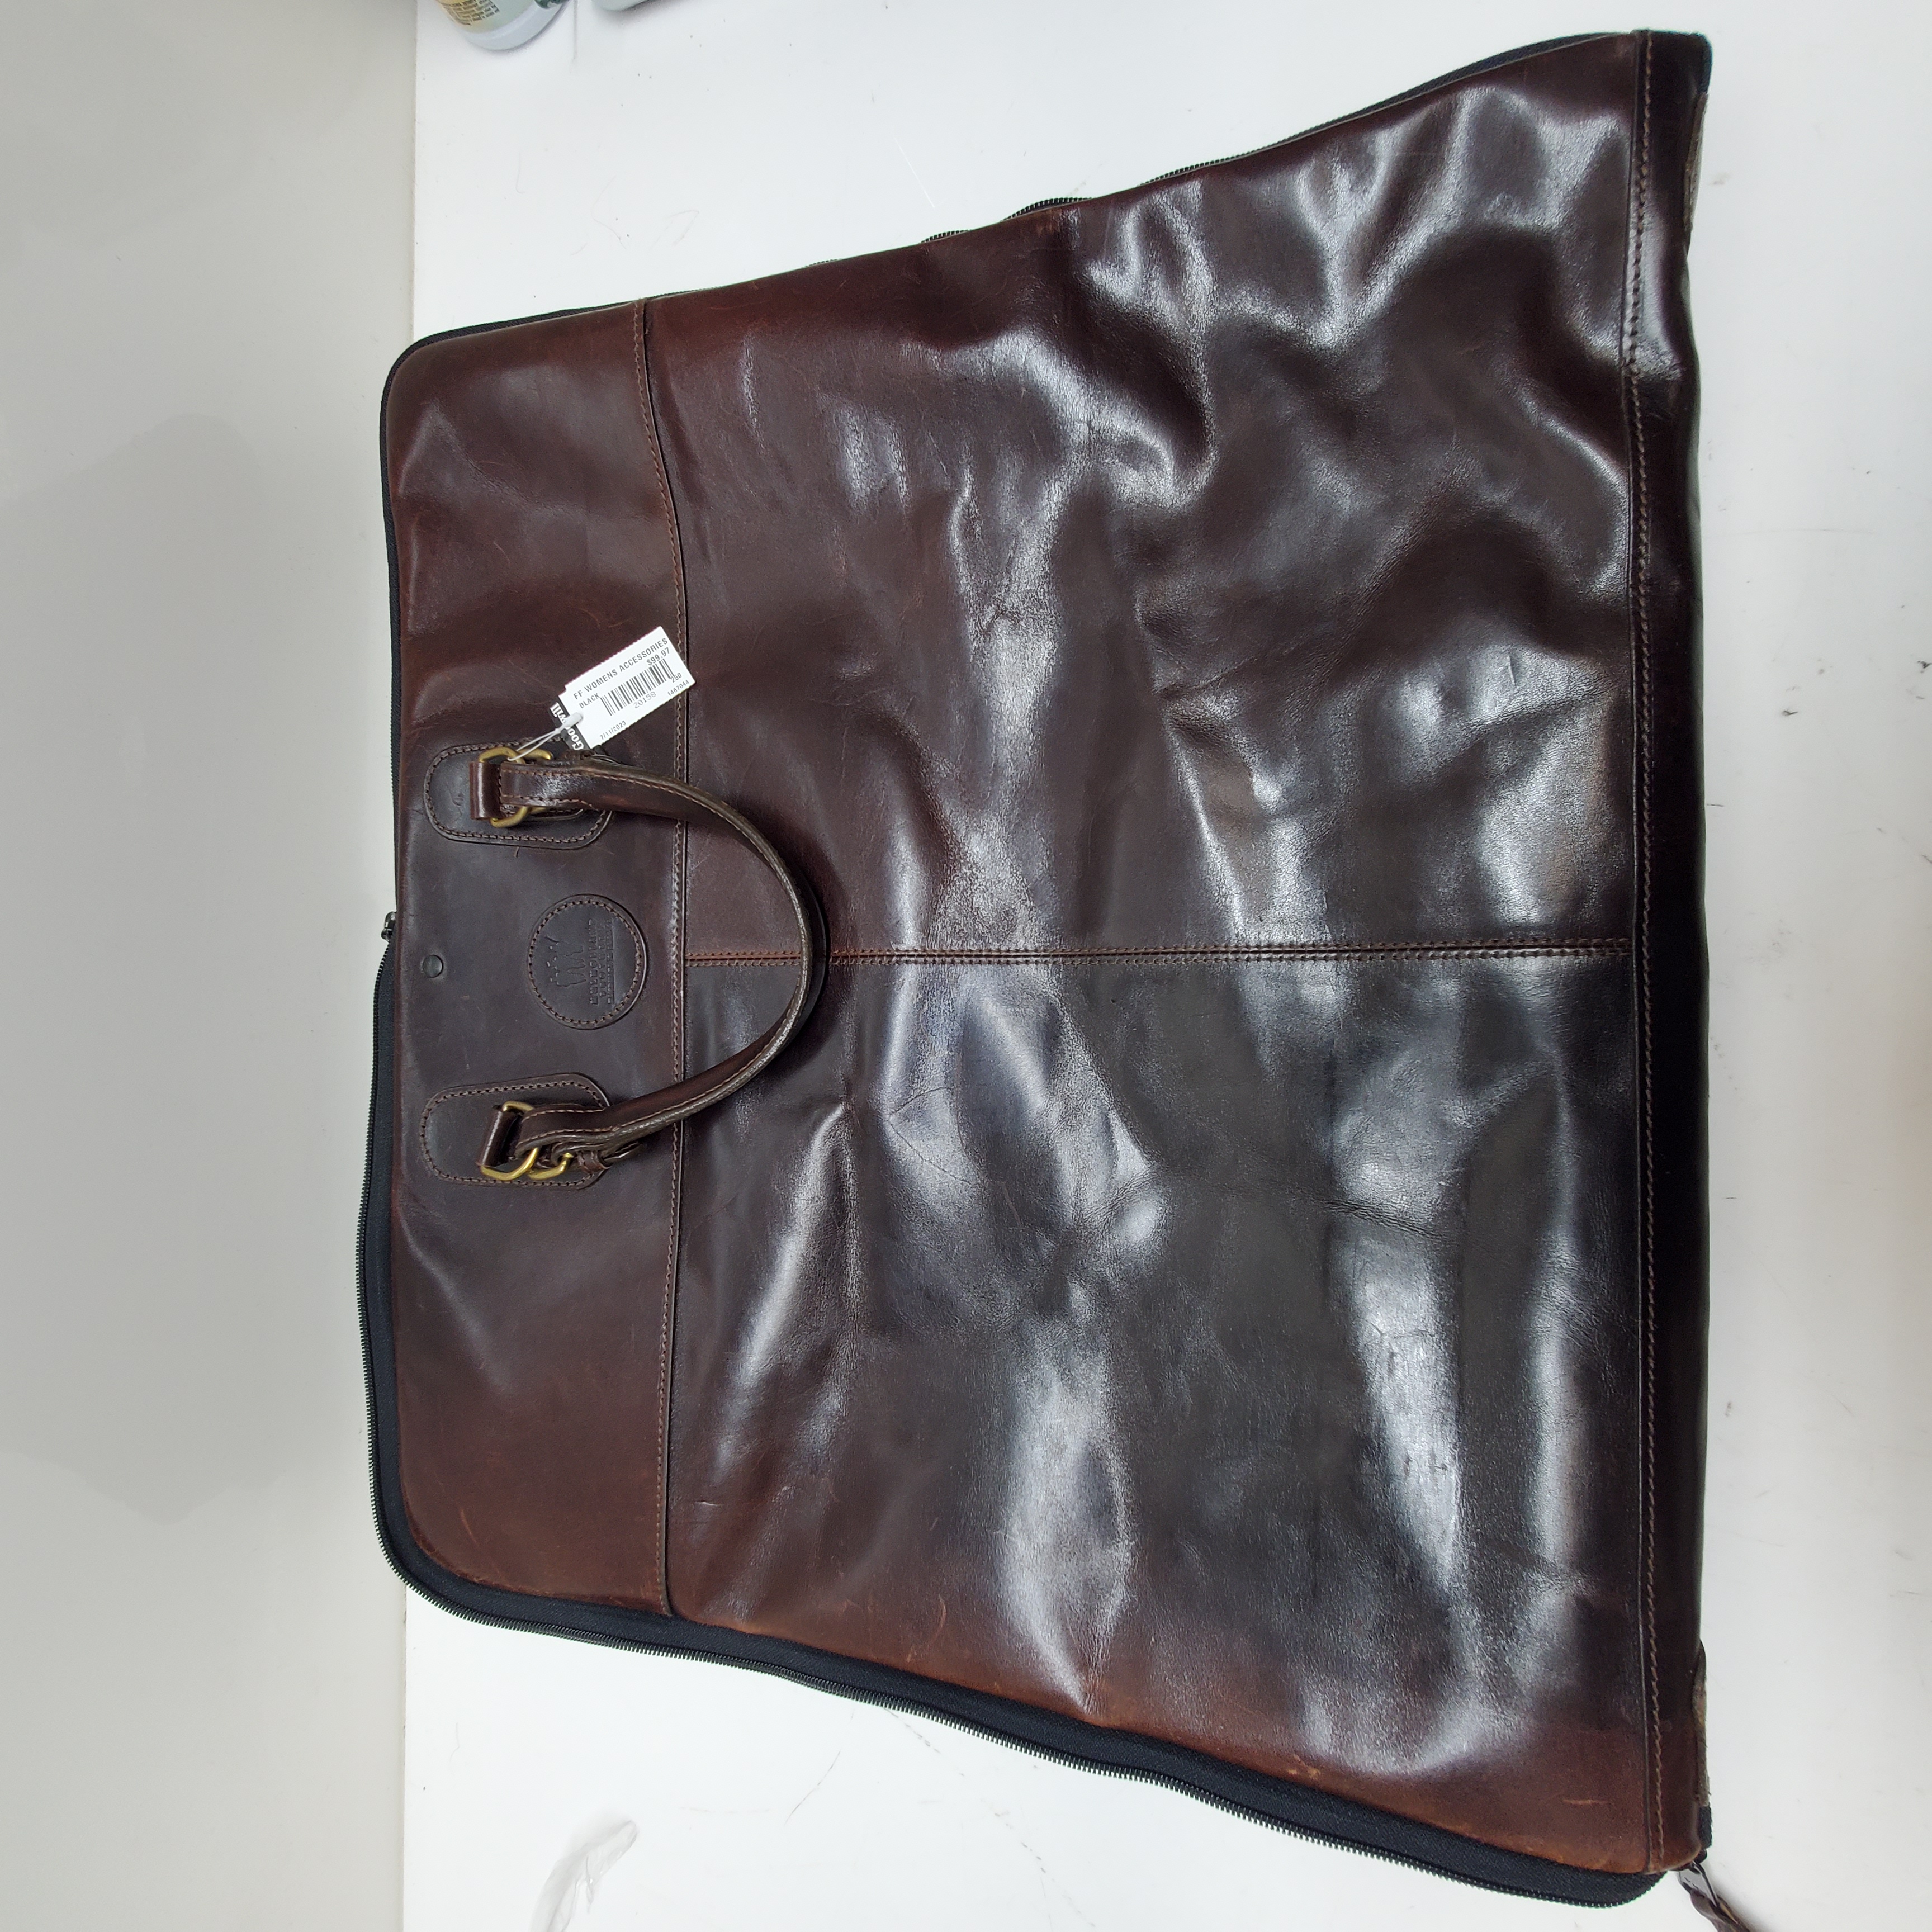 Buy the Mulholland Brothers Leather Garment Bag